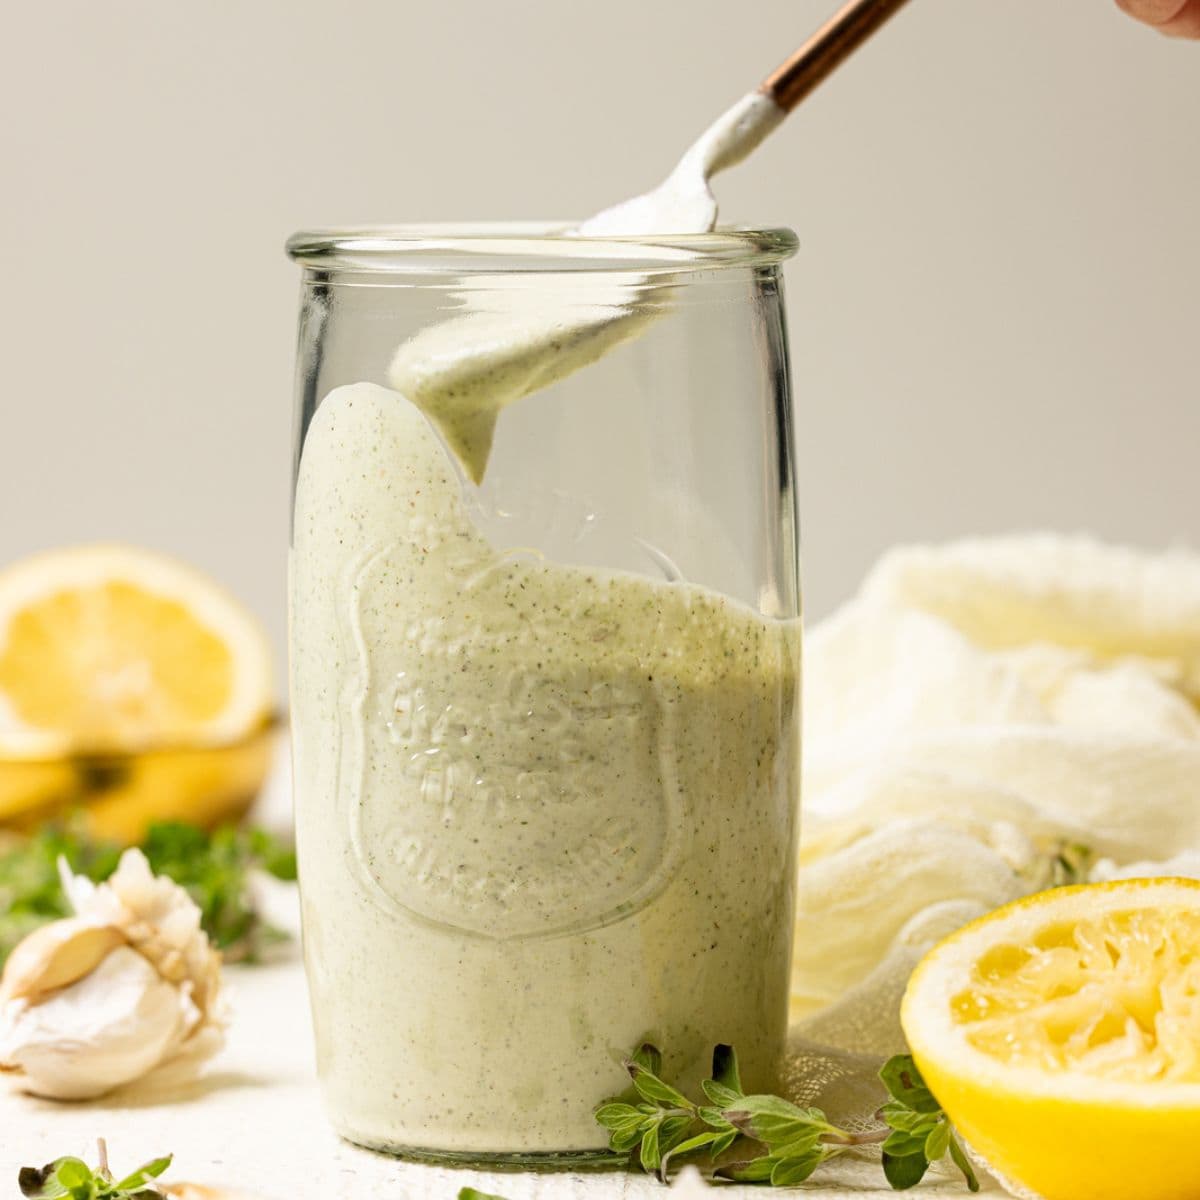 Lemon garlic dressing in a mason jar being scooped up with a spoon on a white table.